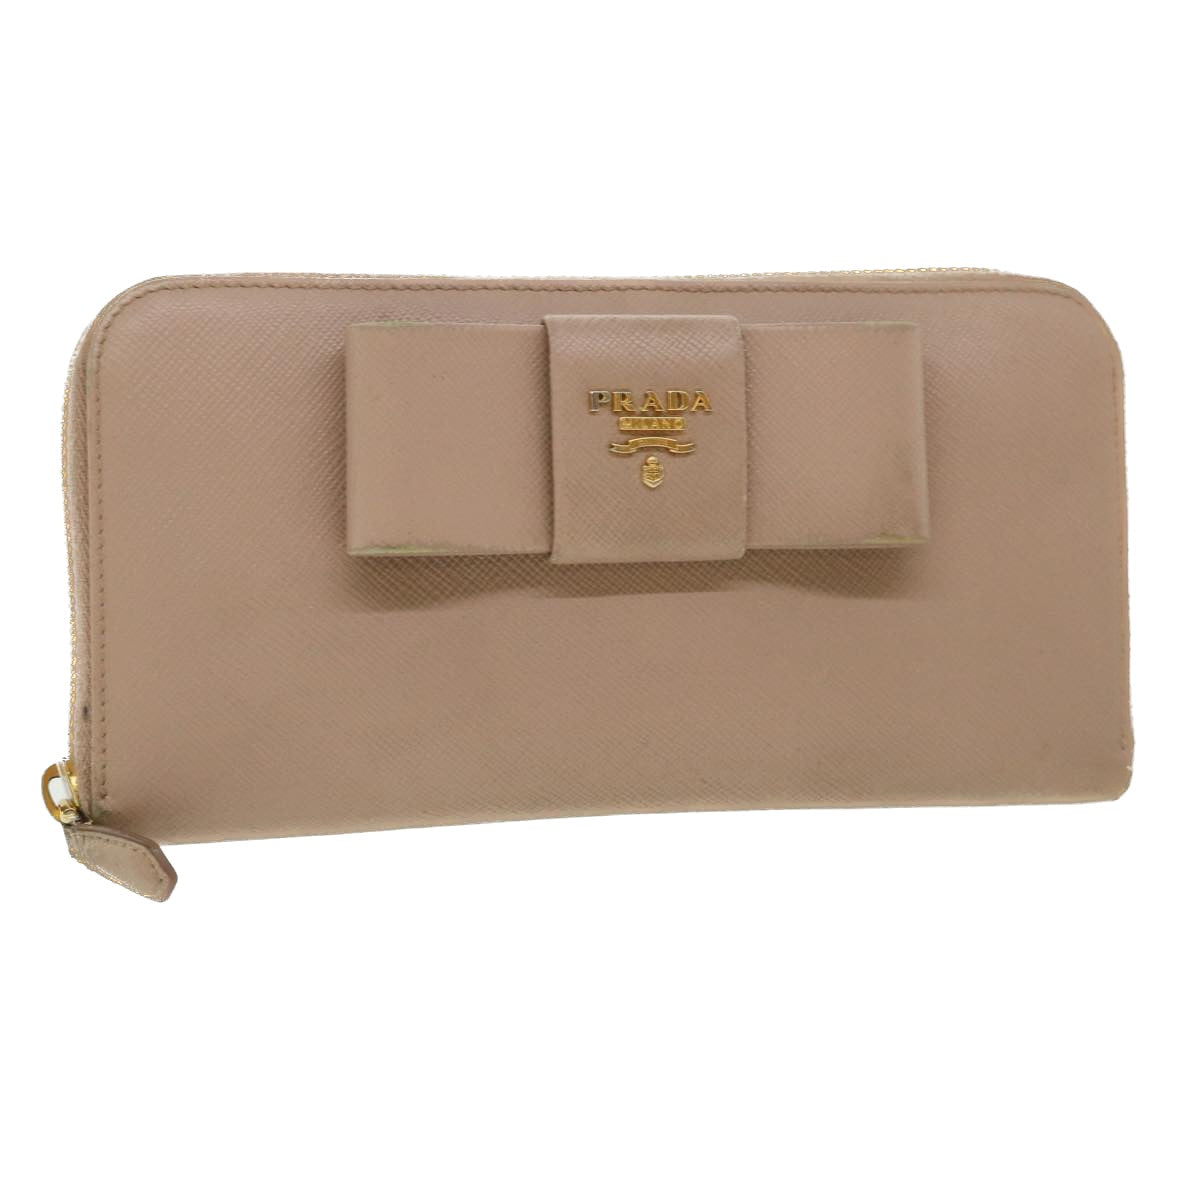 PRADA Long Wallet Safiano Leather Pink Auth 35586